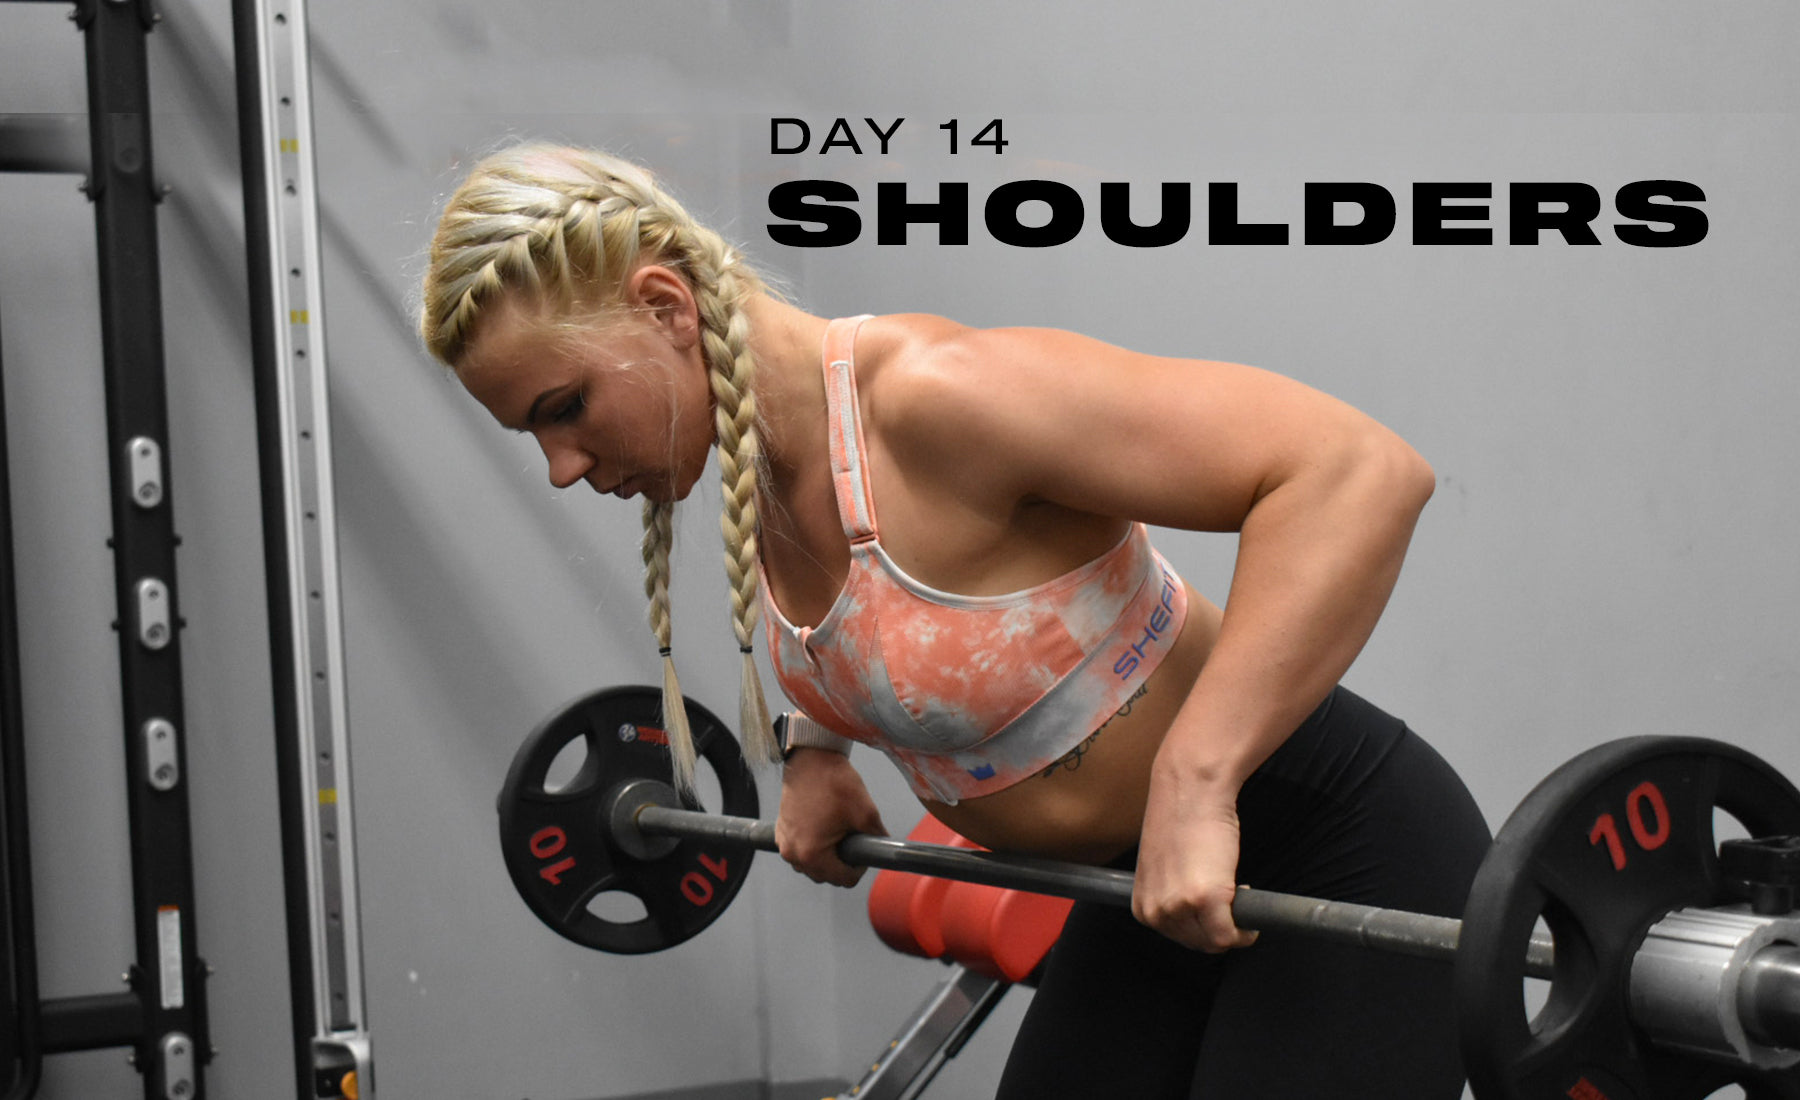 Shoulders: You Got This